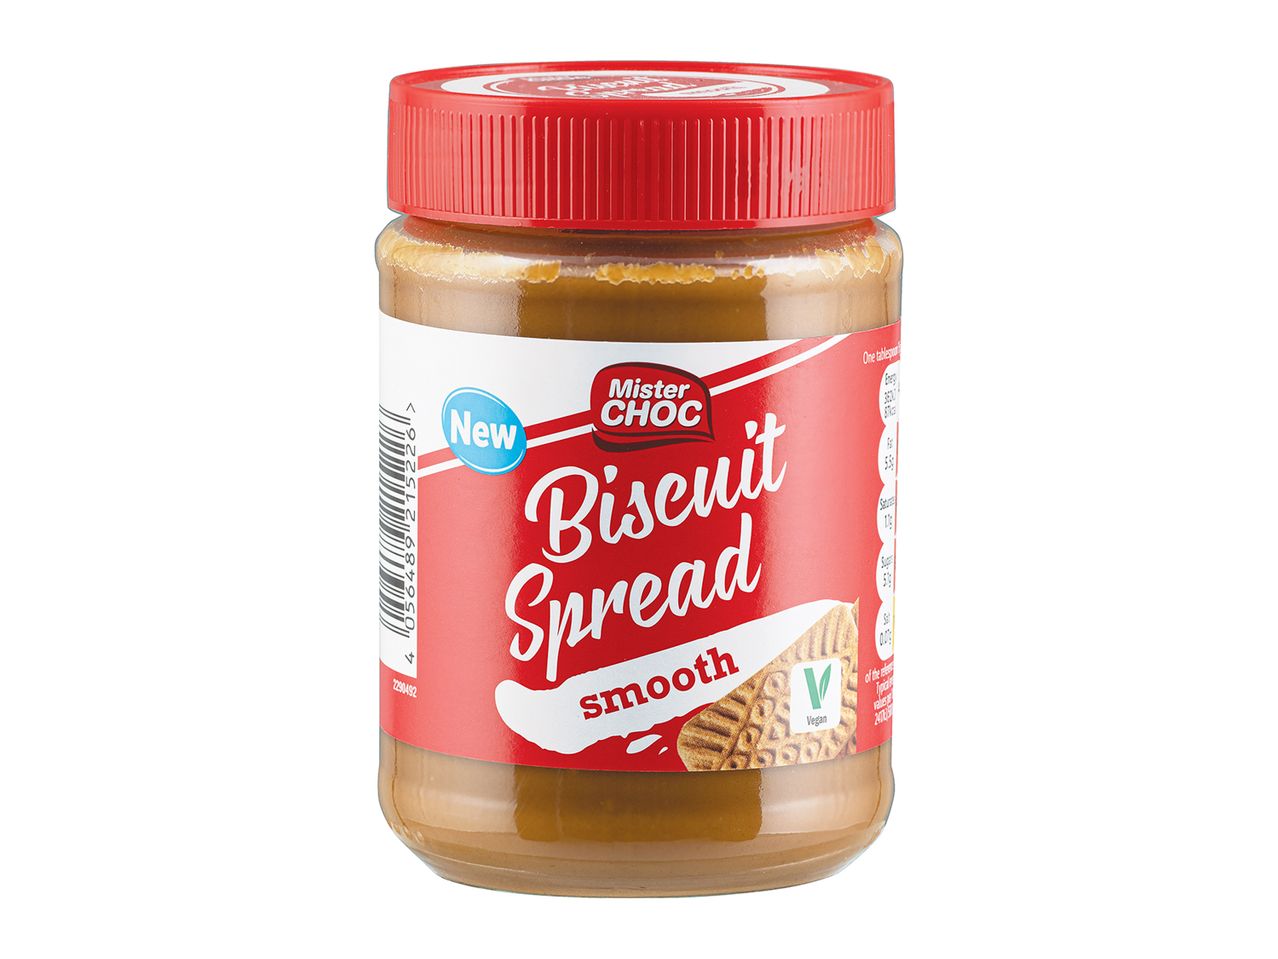 Go to full screen view: Mister Choc Biscuit Spread - Image 2